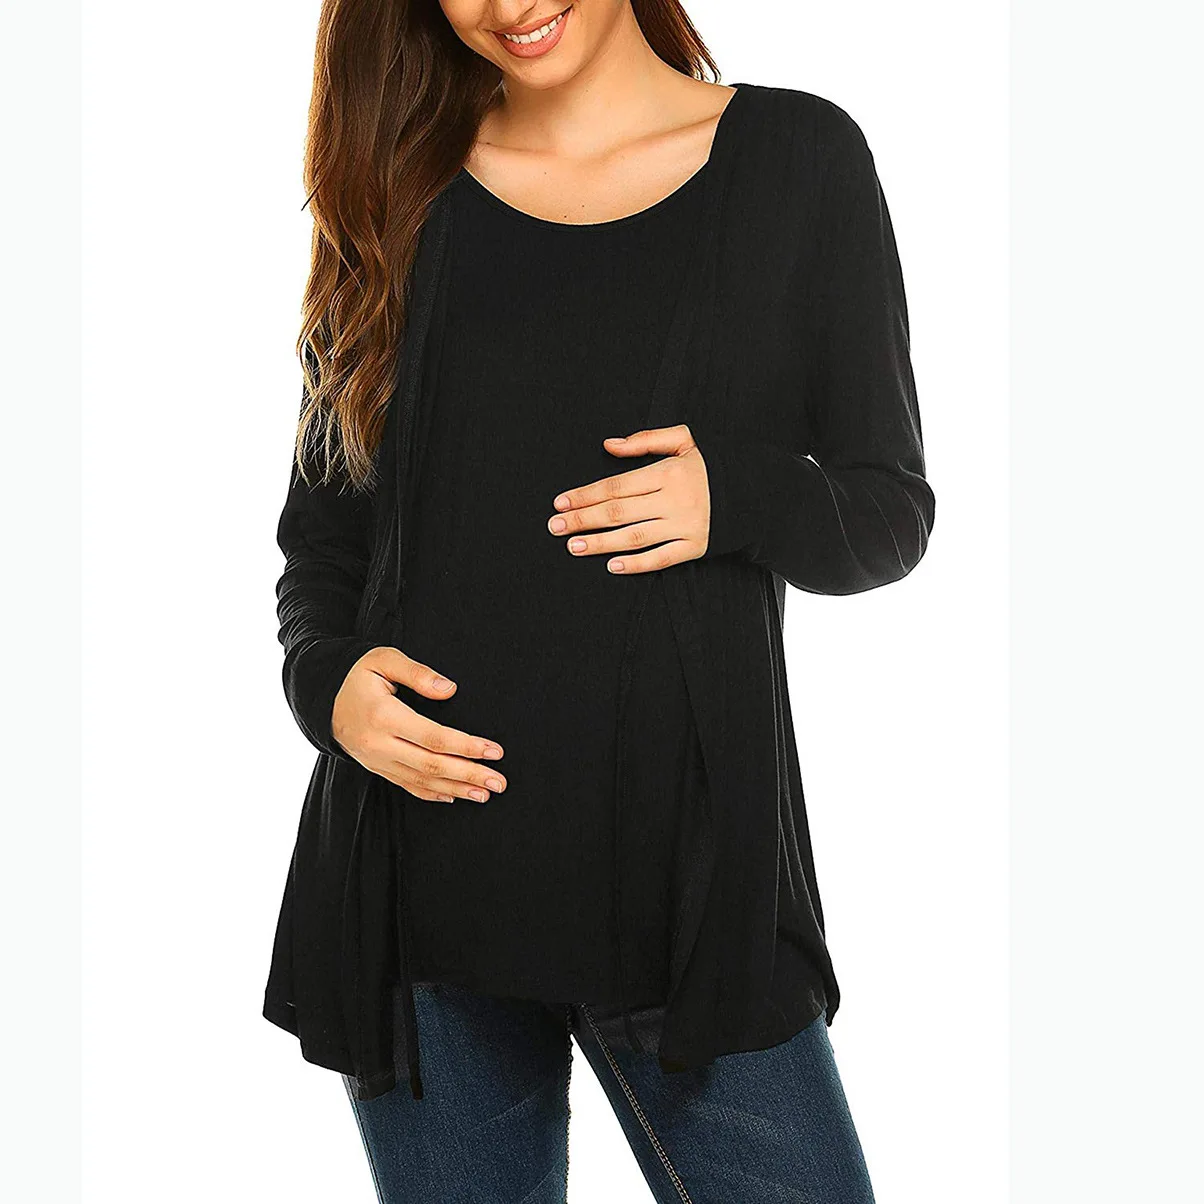 Autumn Winter Long Sleeve Round Neck Fake Two Piece Lace Up Breastfeeding Pregnant Women's Top T-shirt Pregnant Women's Outwear